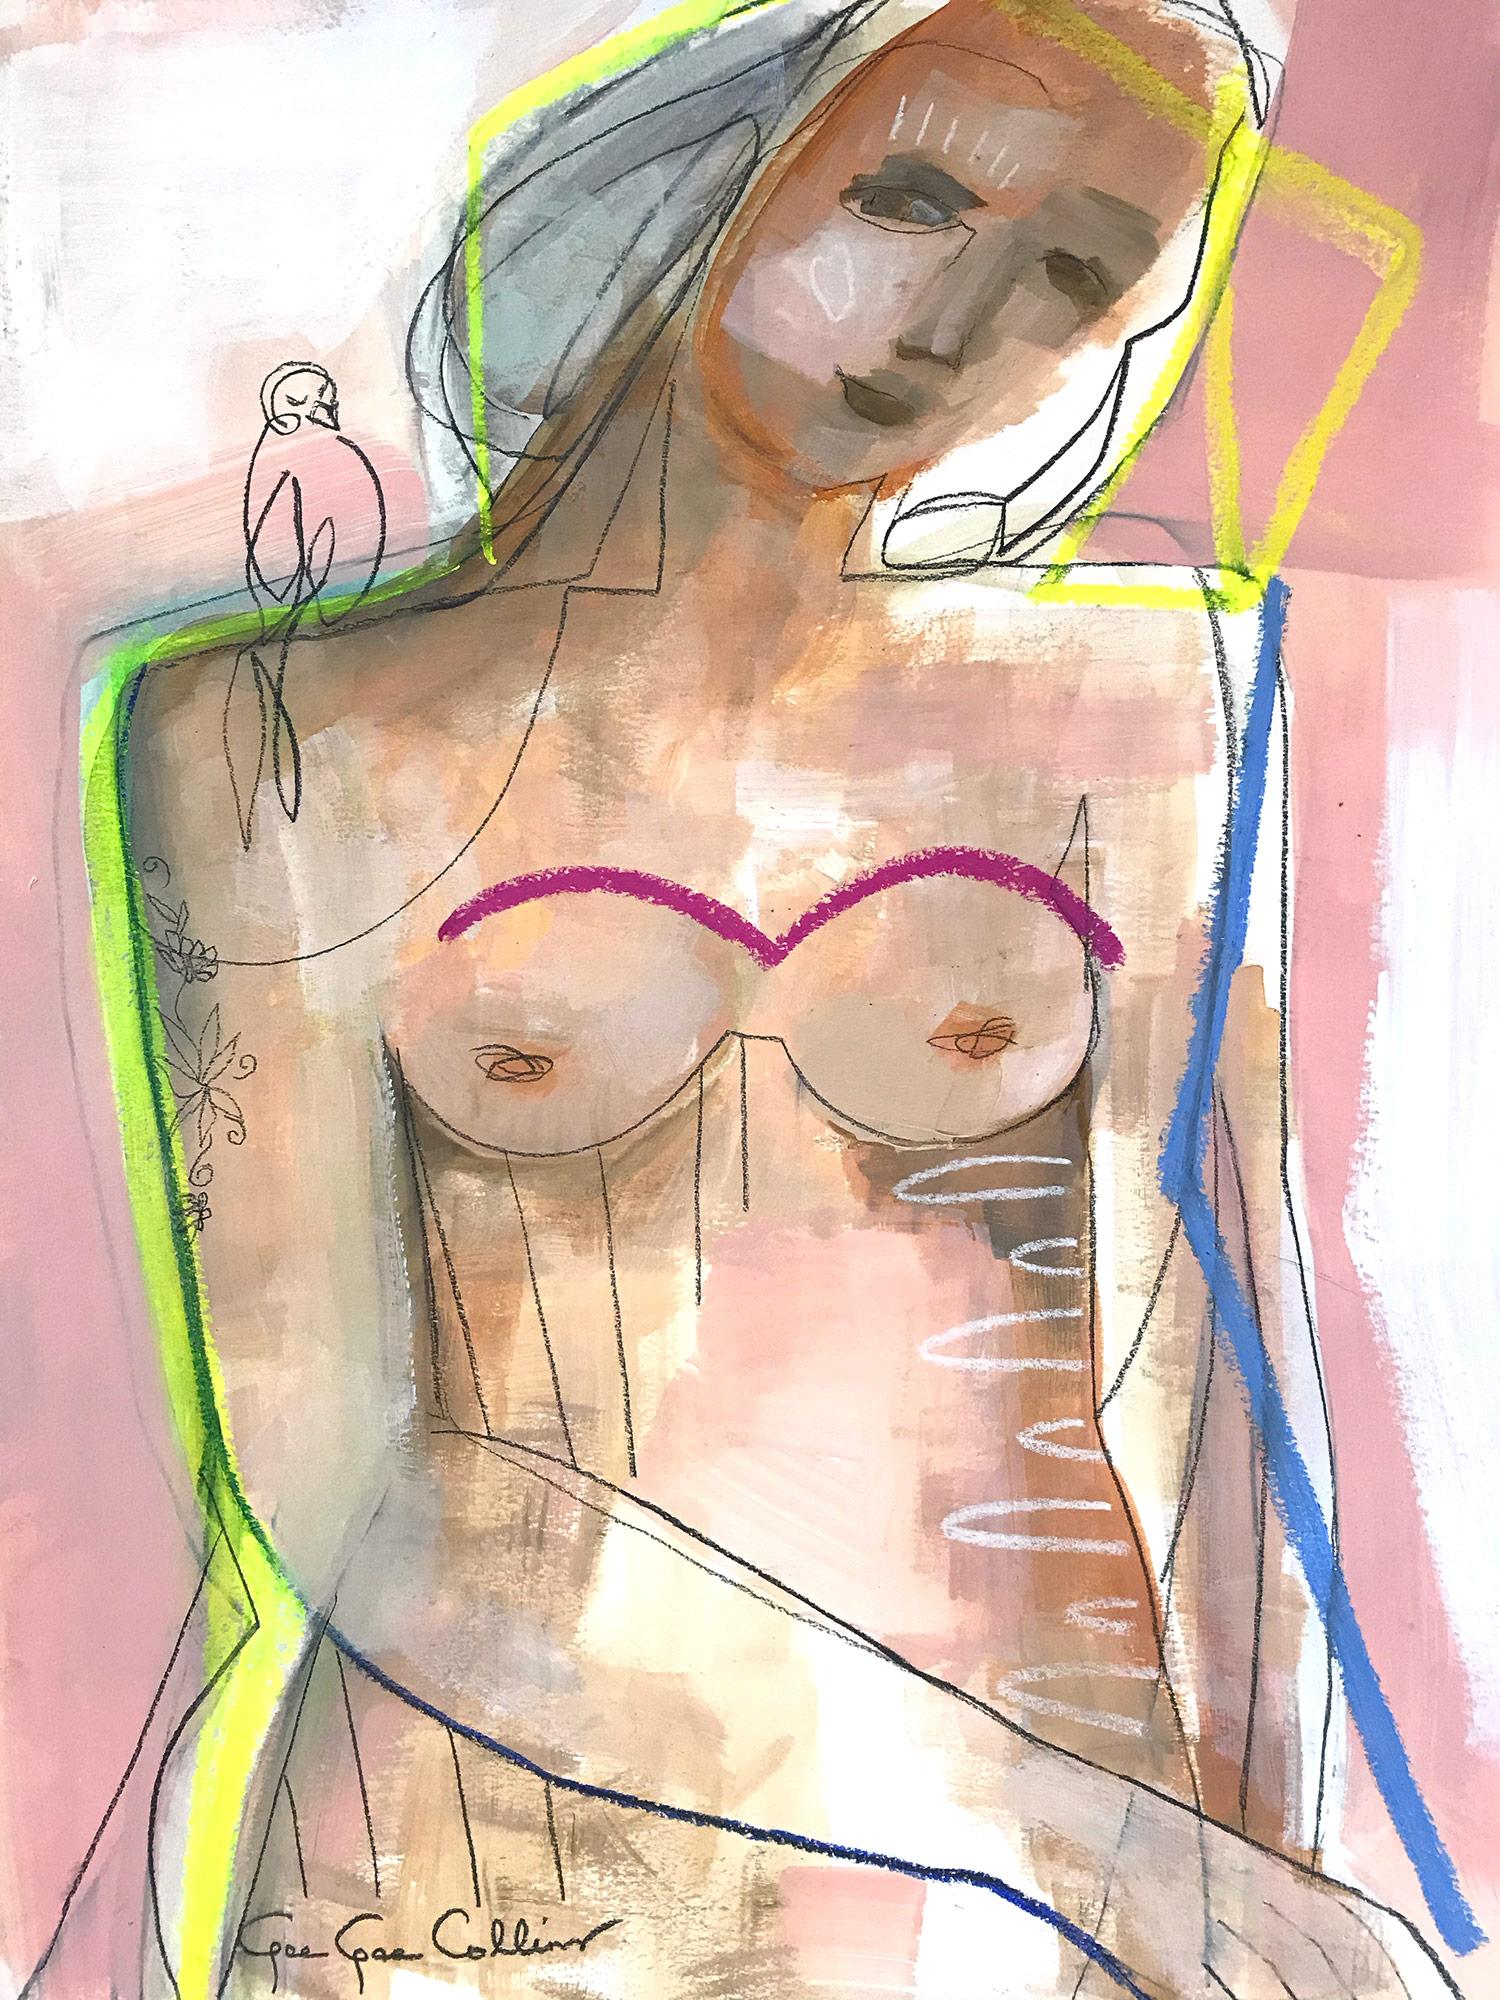 Gee Gee Collins Figurative Painting - "Madonna and Bird" Abstract Modern Colorful Nude Painting on Paper